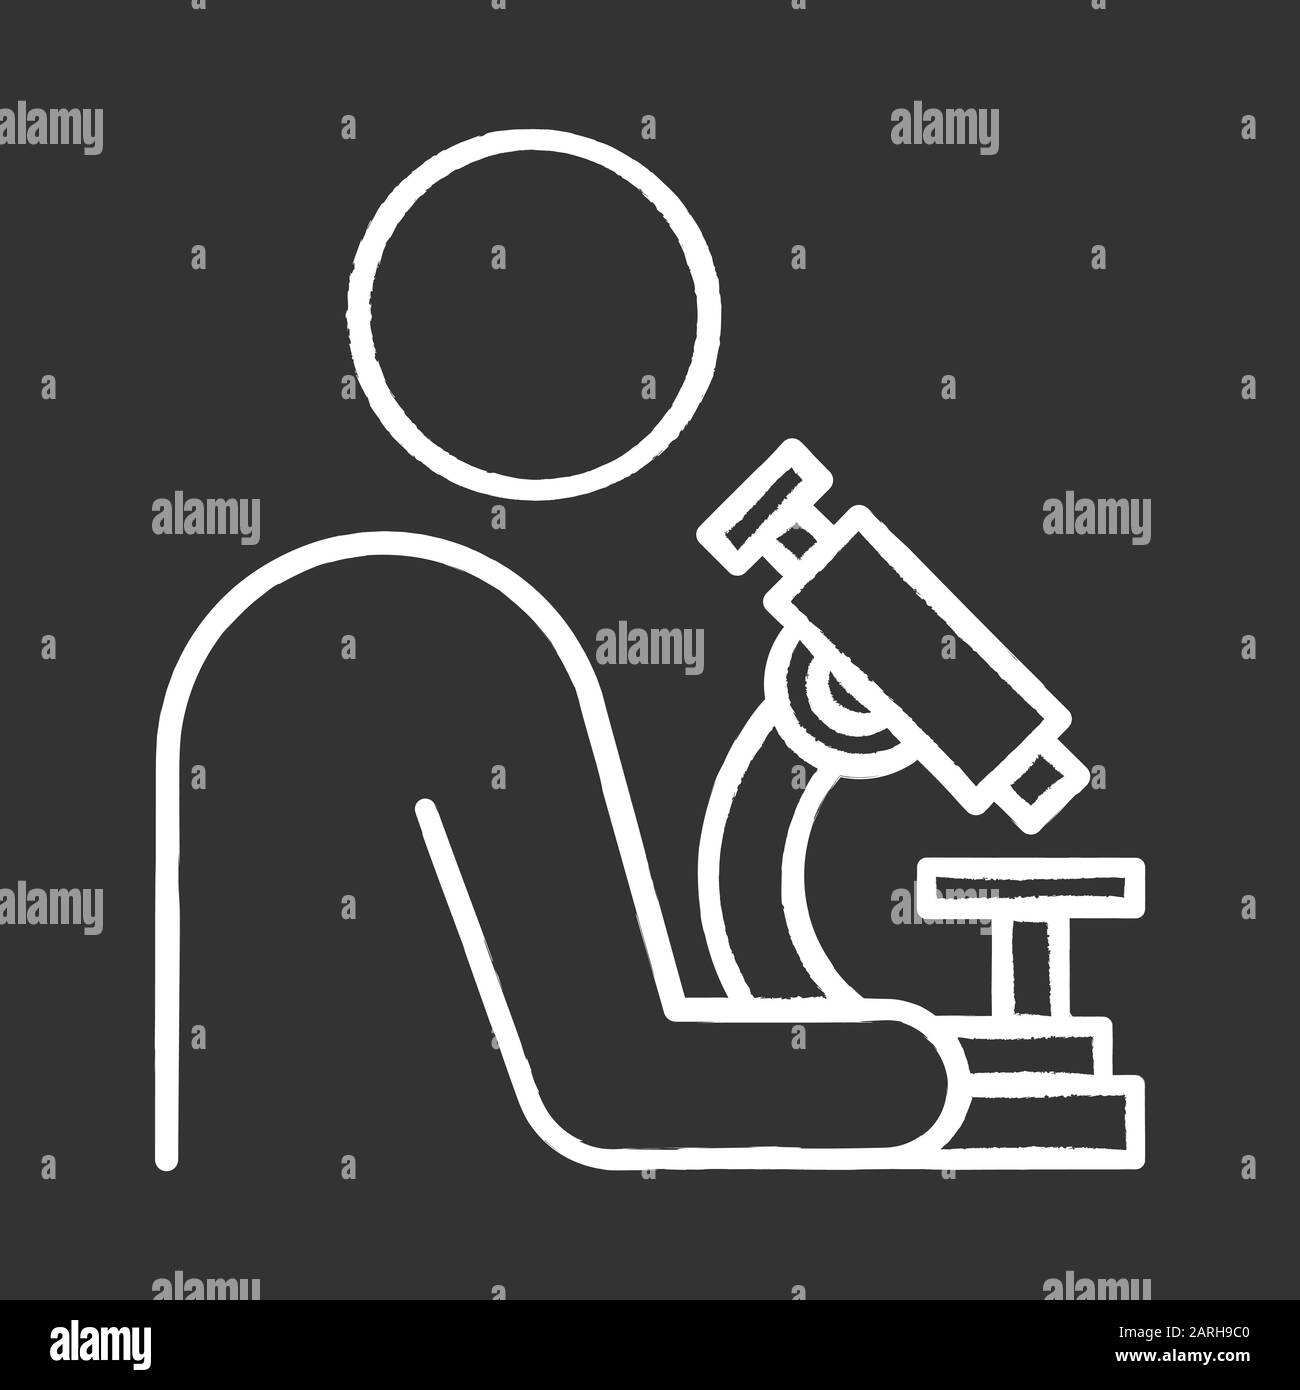 Man with microscope chalk icon. Scientist, doctor at work. Organic chemistry. Laboratory research. Conducting biological experiments. Medical analysis Stock Vector